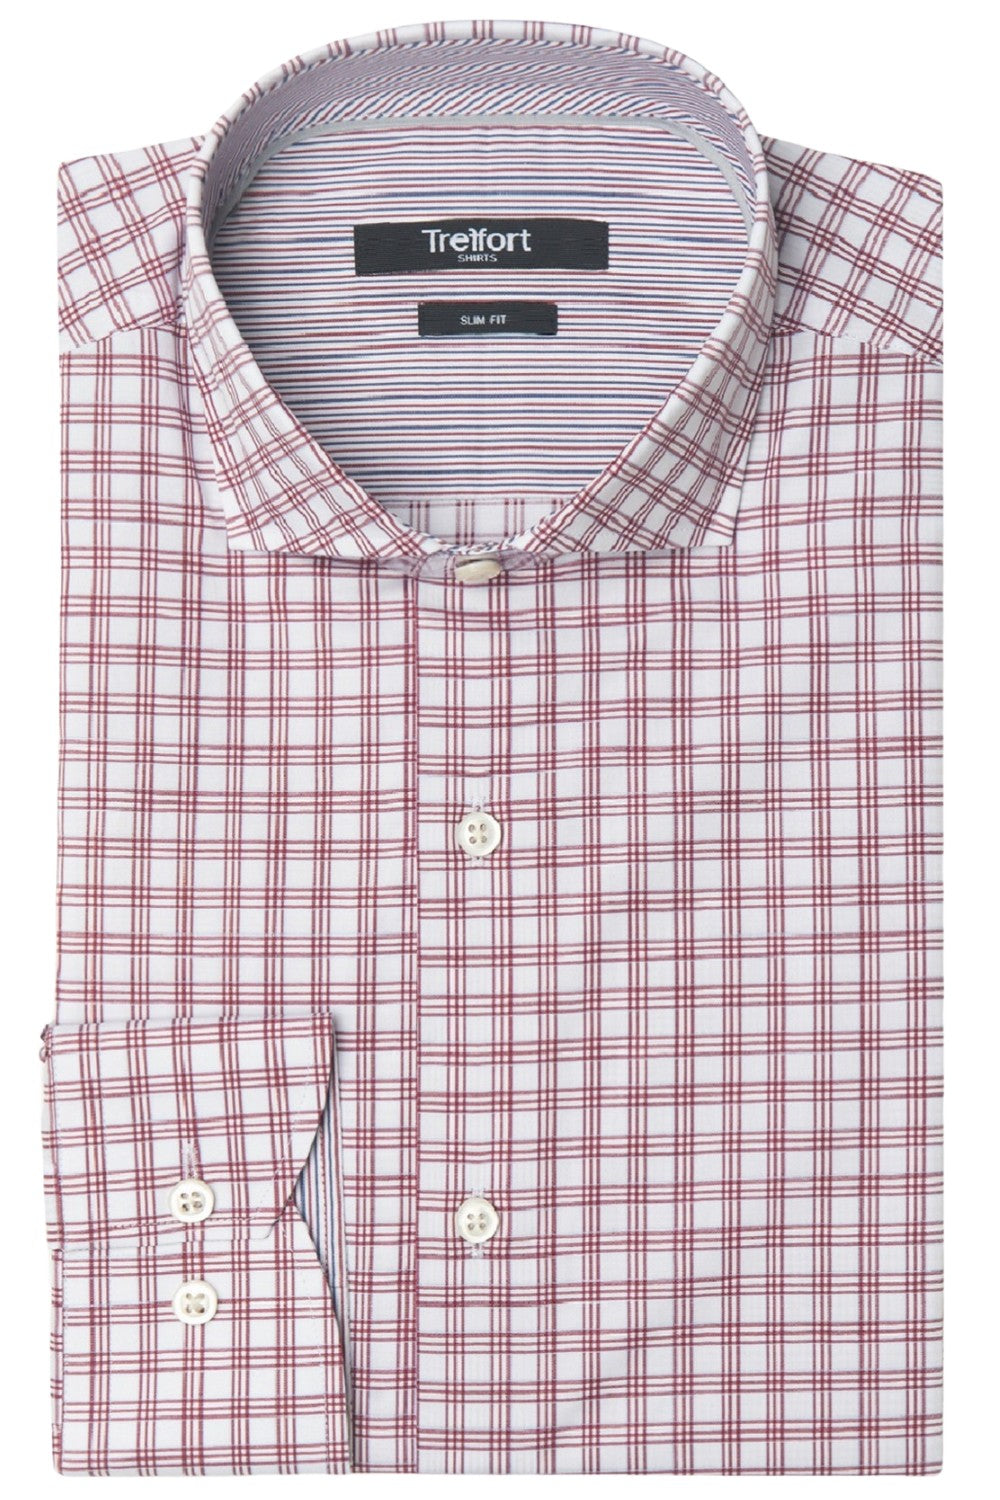 LENOX RED CHECKERED BUTTON DOWN DRESS SHIRT - CASUAL /FORMAL EVENT - FRONT VIEW